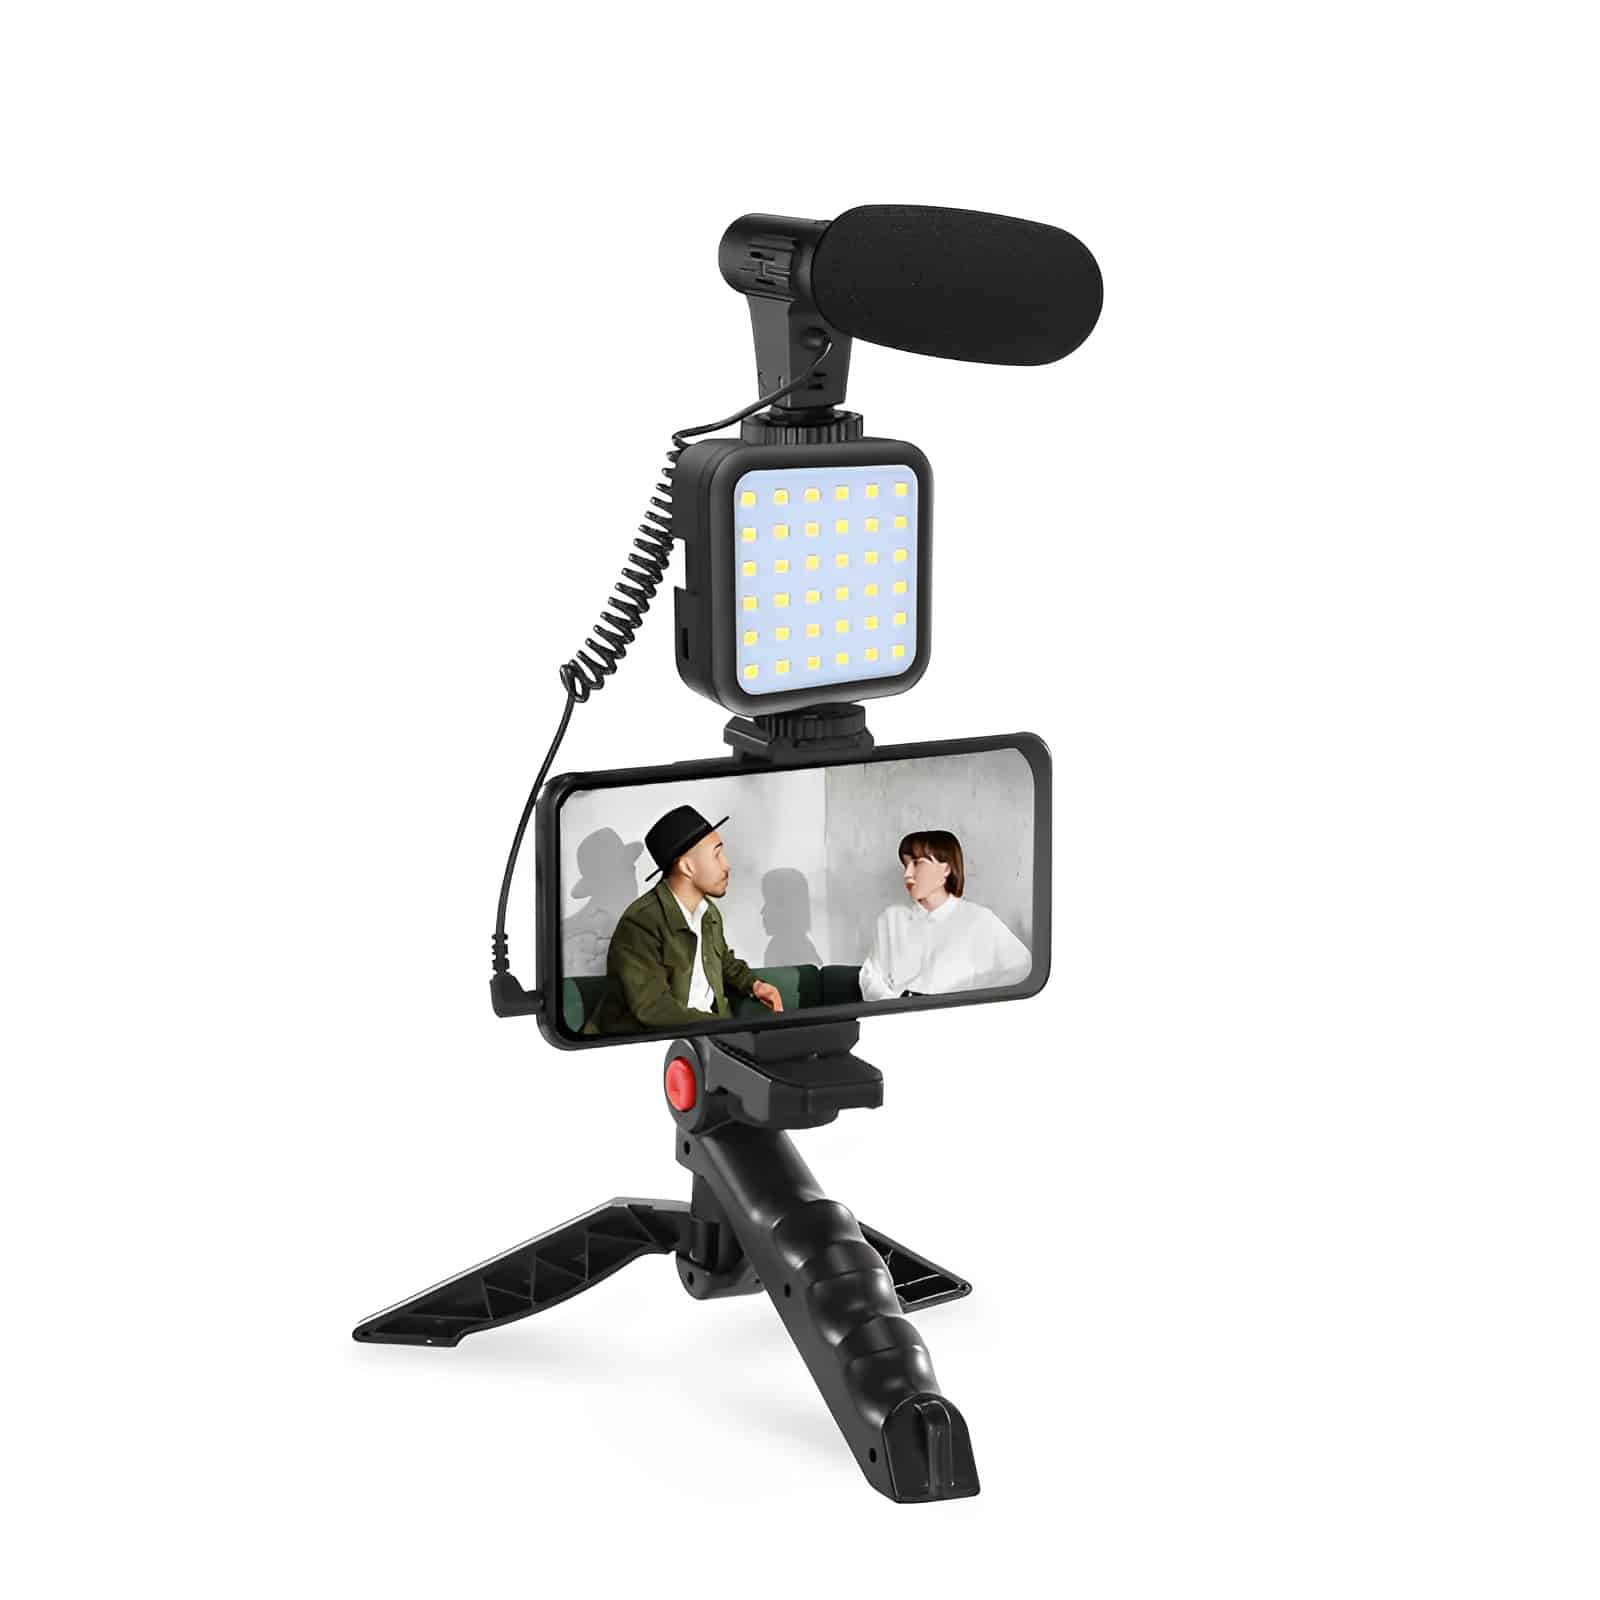 A complete vlogging kit designed specifically for hassle-free, high-quality audio and video recording to a smartphone with a Lightning port.